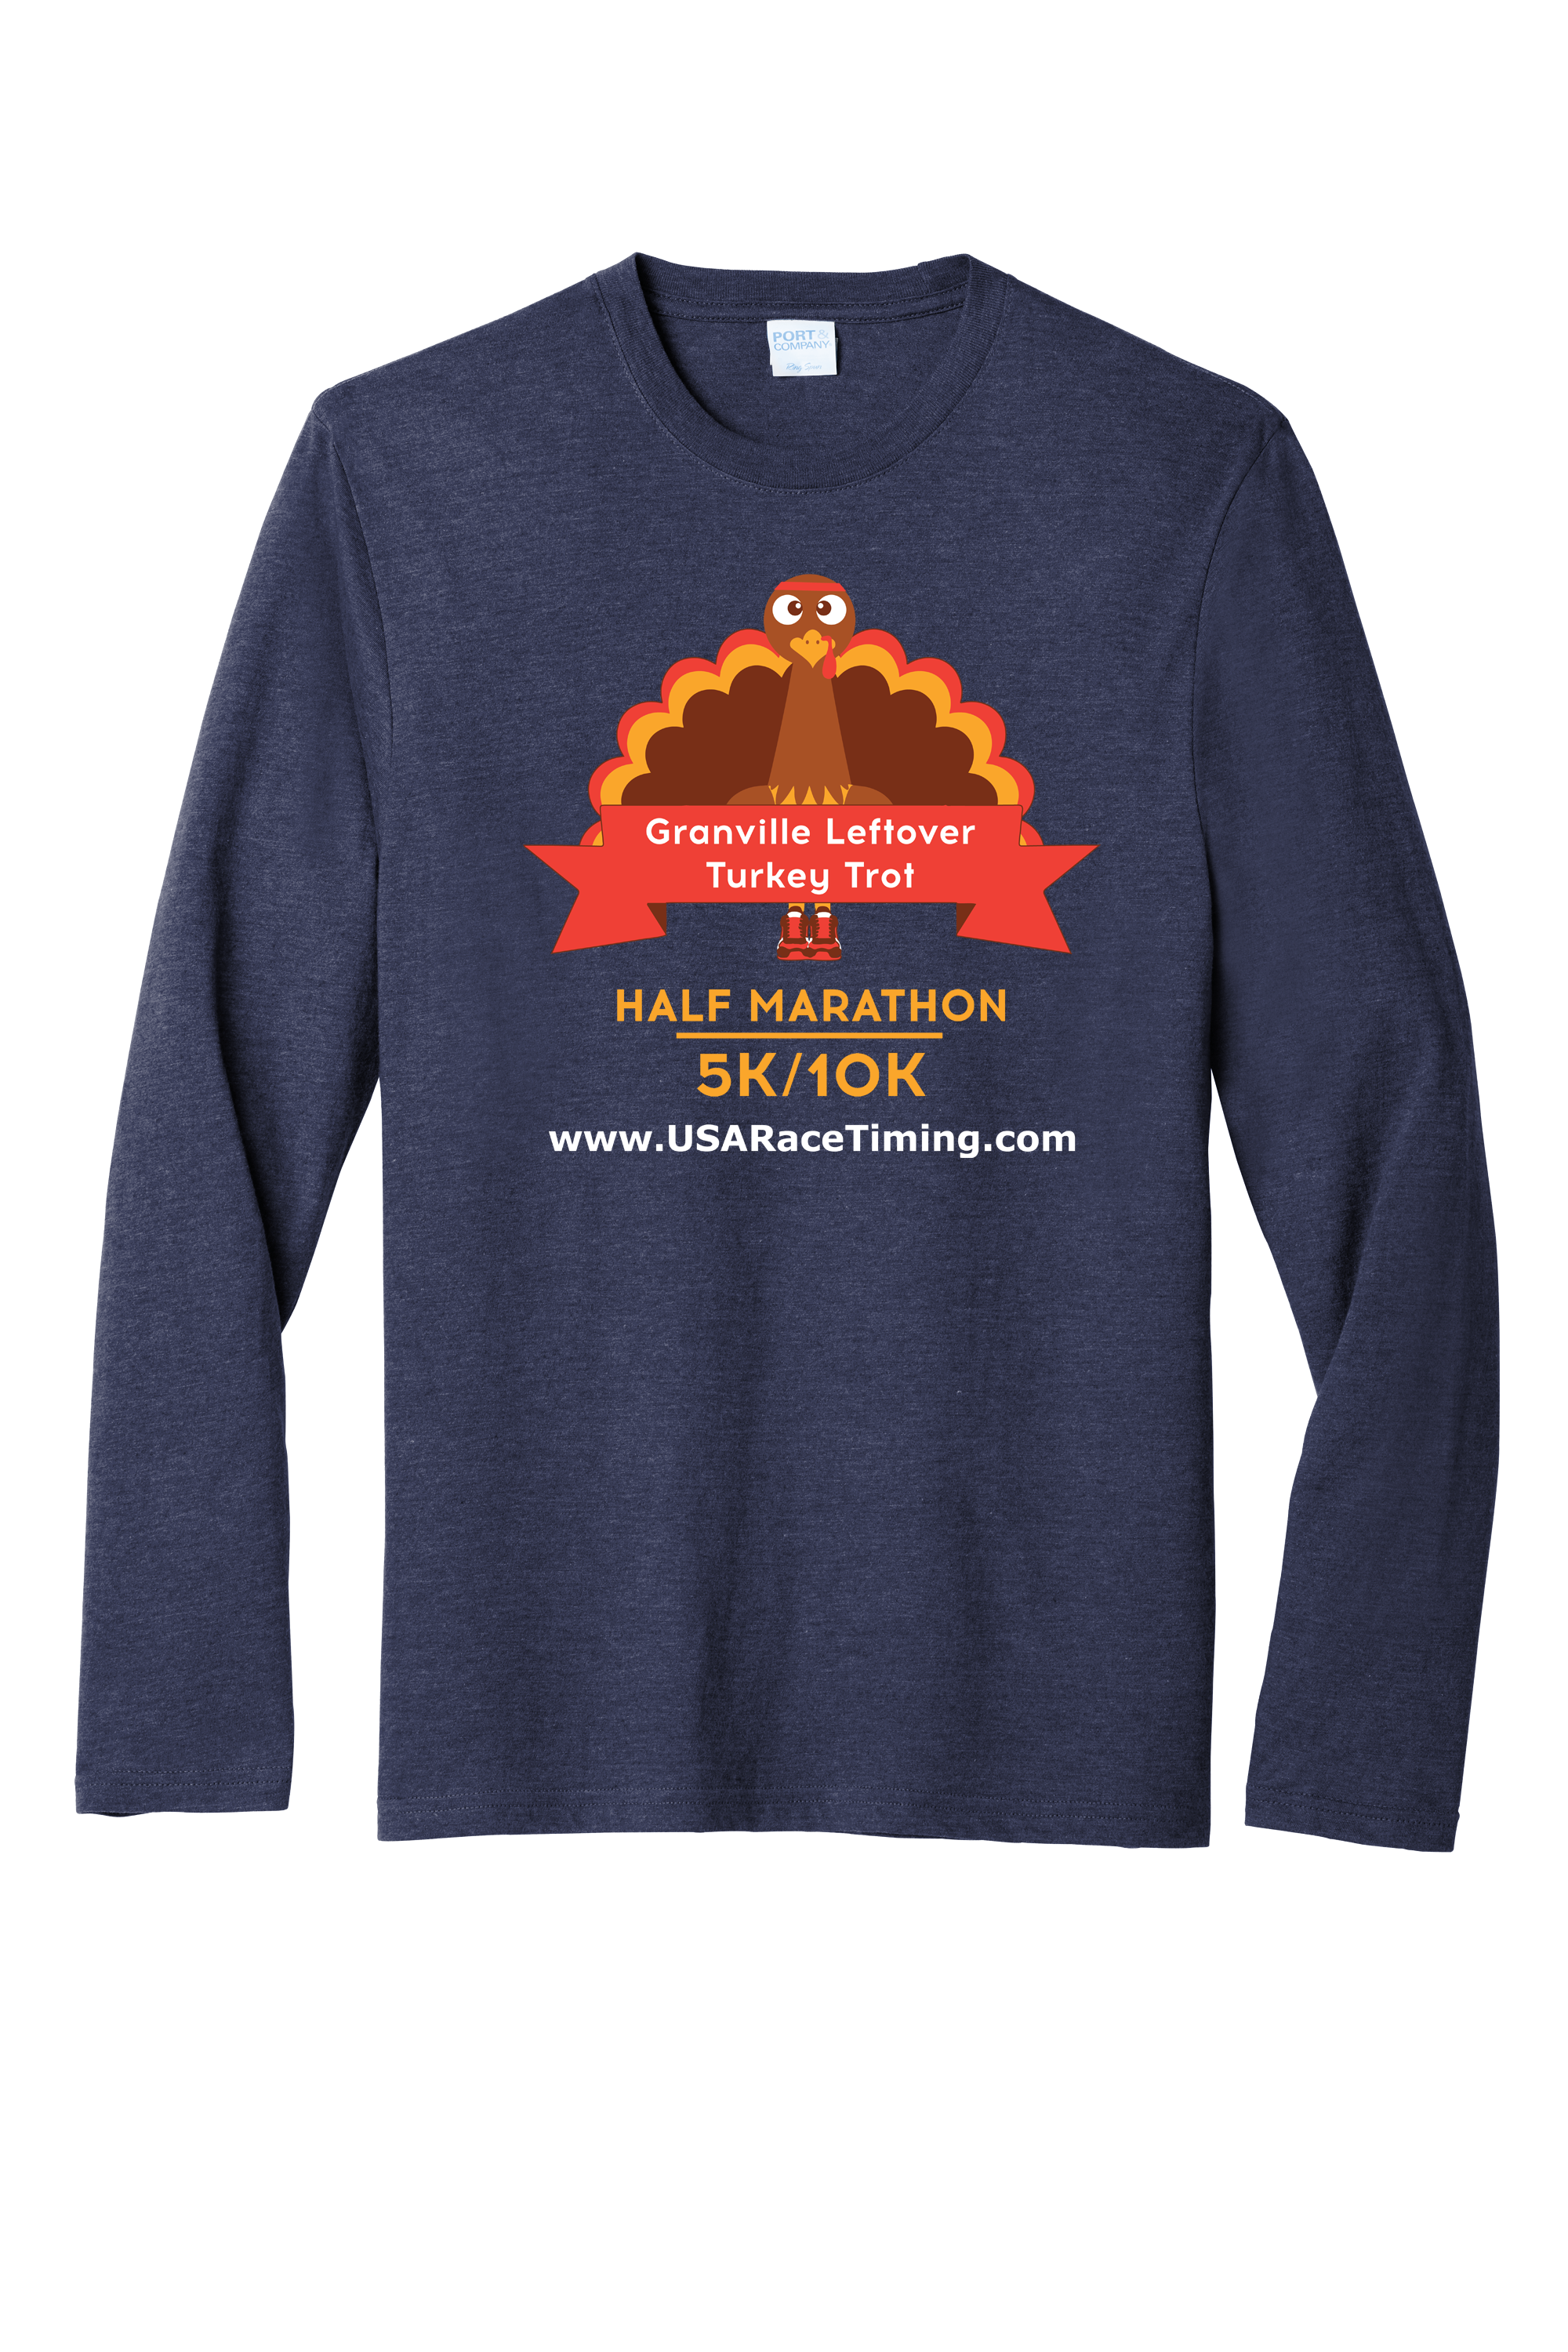 Johnstown, Alexandria & Granville Ohio Turkey Trot Official Long Sleeve Shirt - Heathered Navy With Full Color Ink Print - Sport Tee Apparel Screen Printing - USA Race Timing - Johnstown Can - Charity Race - 5k, 10k & Half Marathon